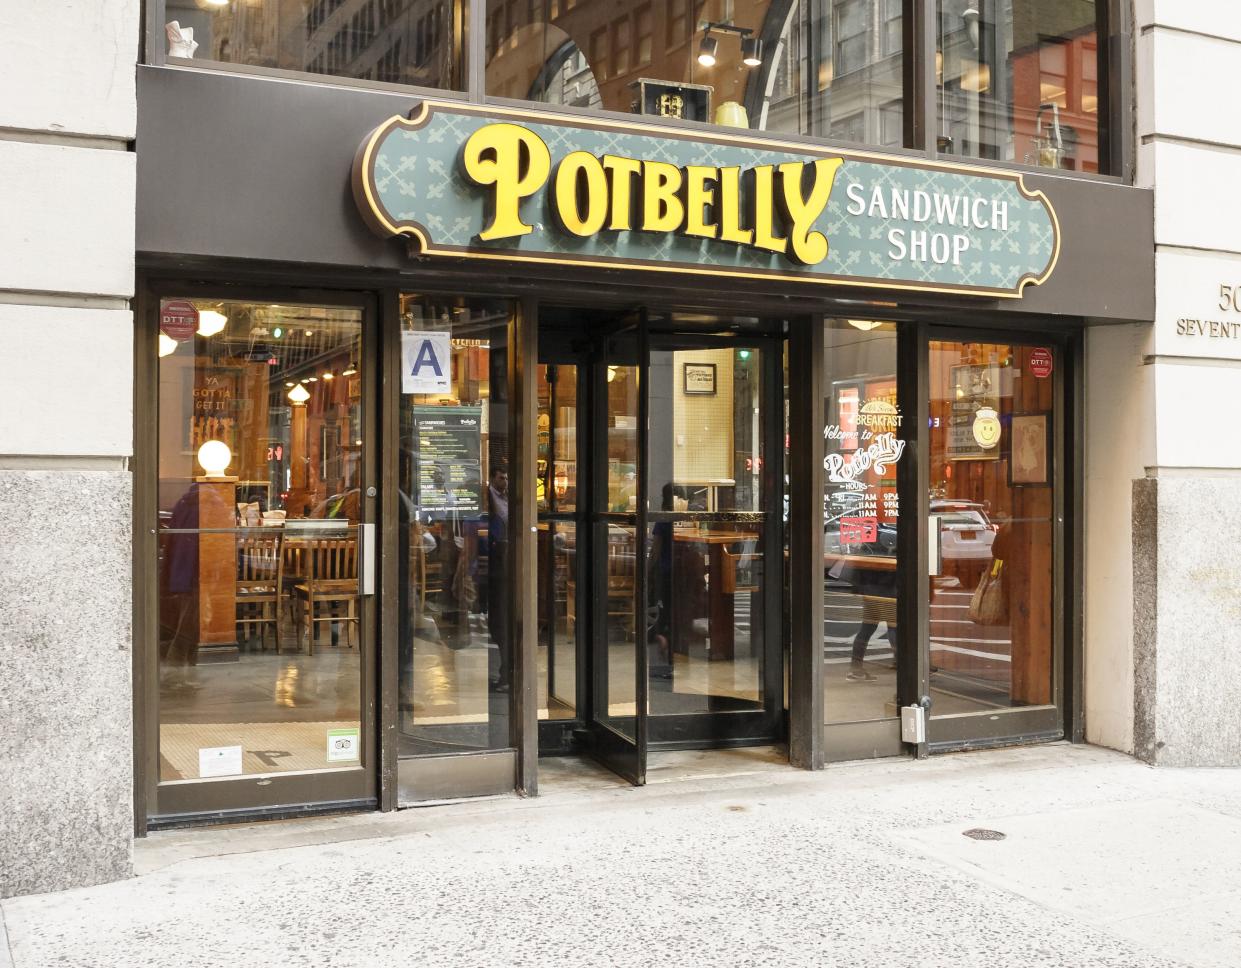 New York, New York, USA - October 8, 2015: A Potbelly Sandwich Shop on 7th Avenue in Manhattan. Potbelly serves sub sandwiches an other items in an